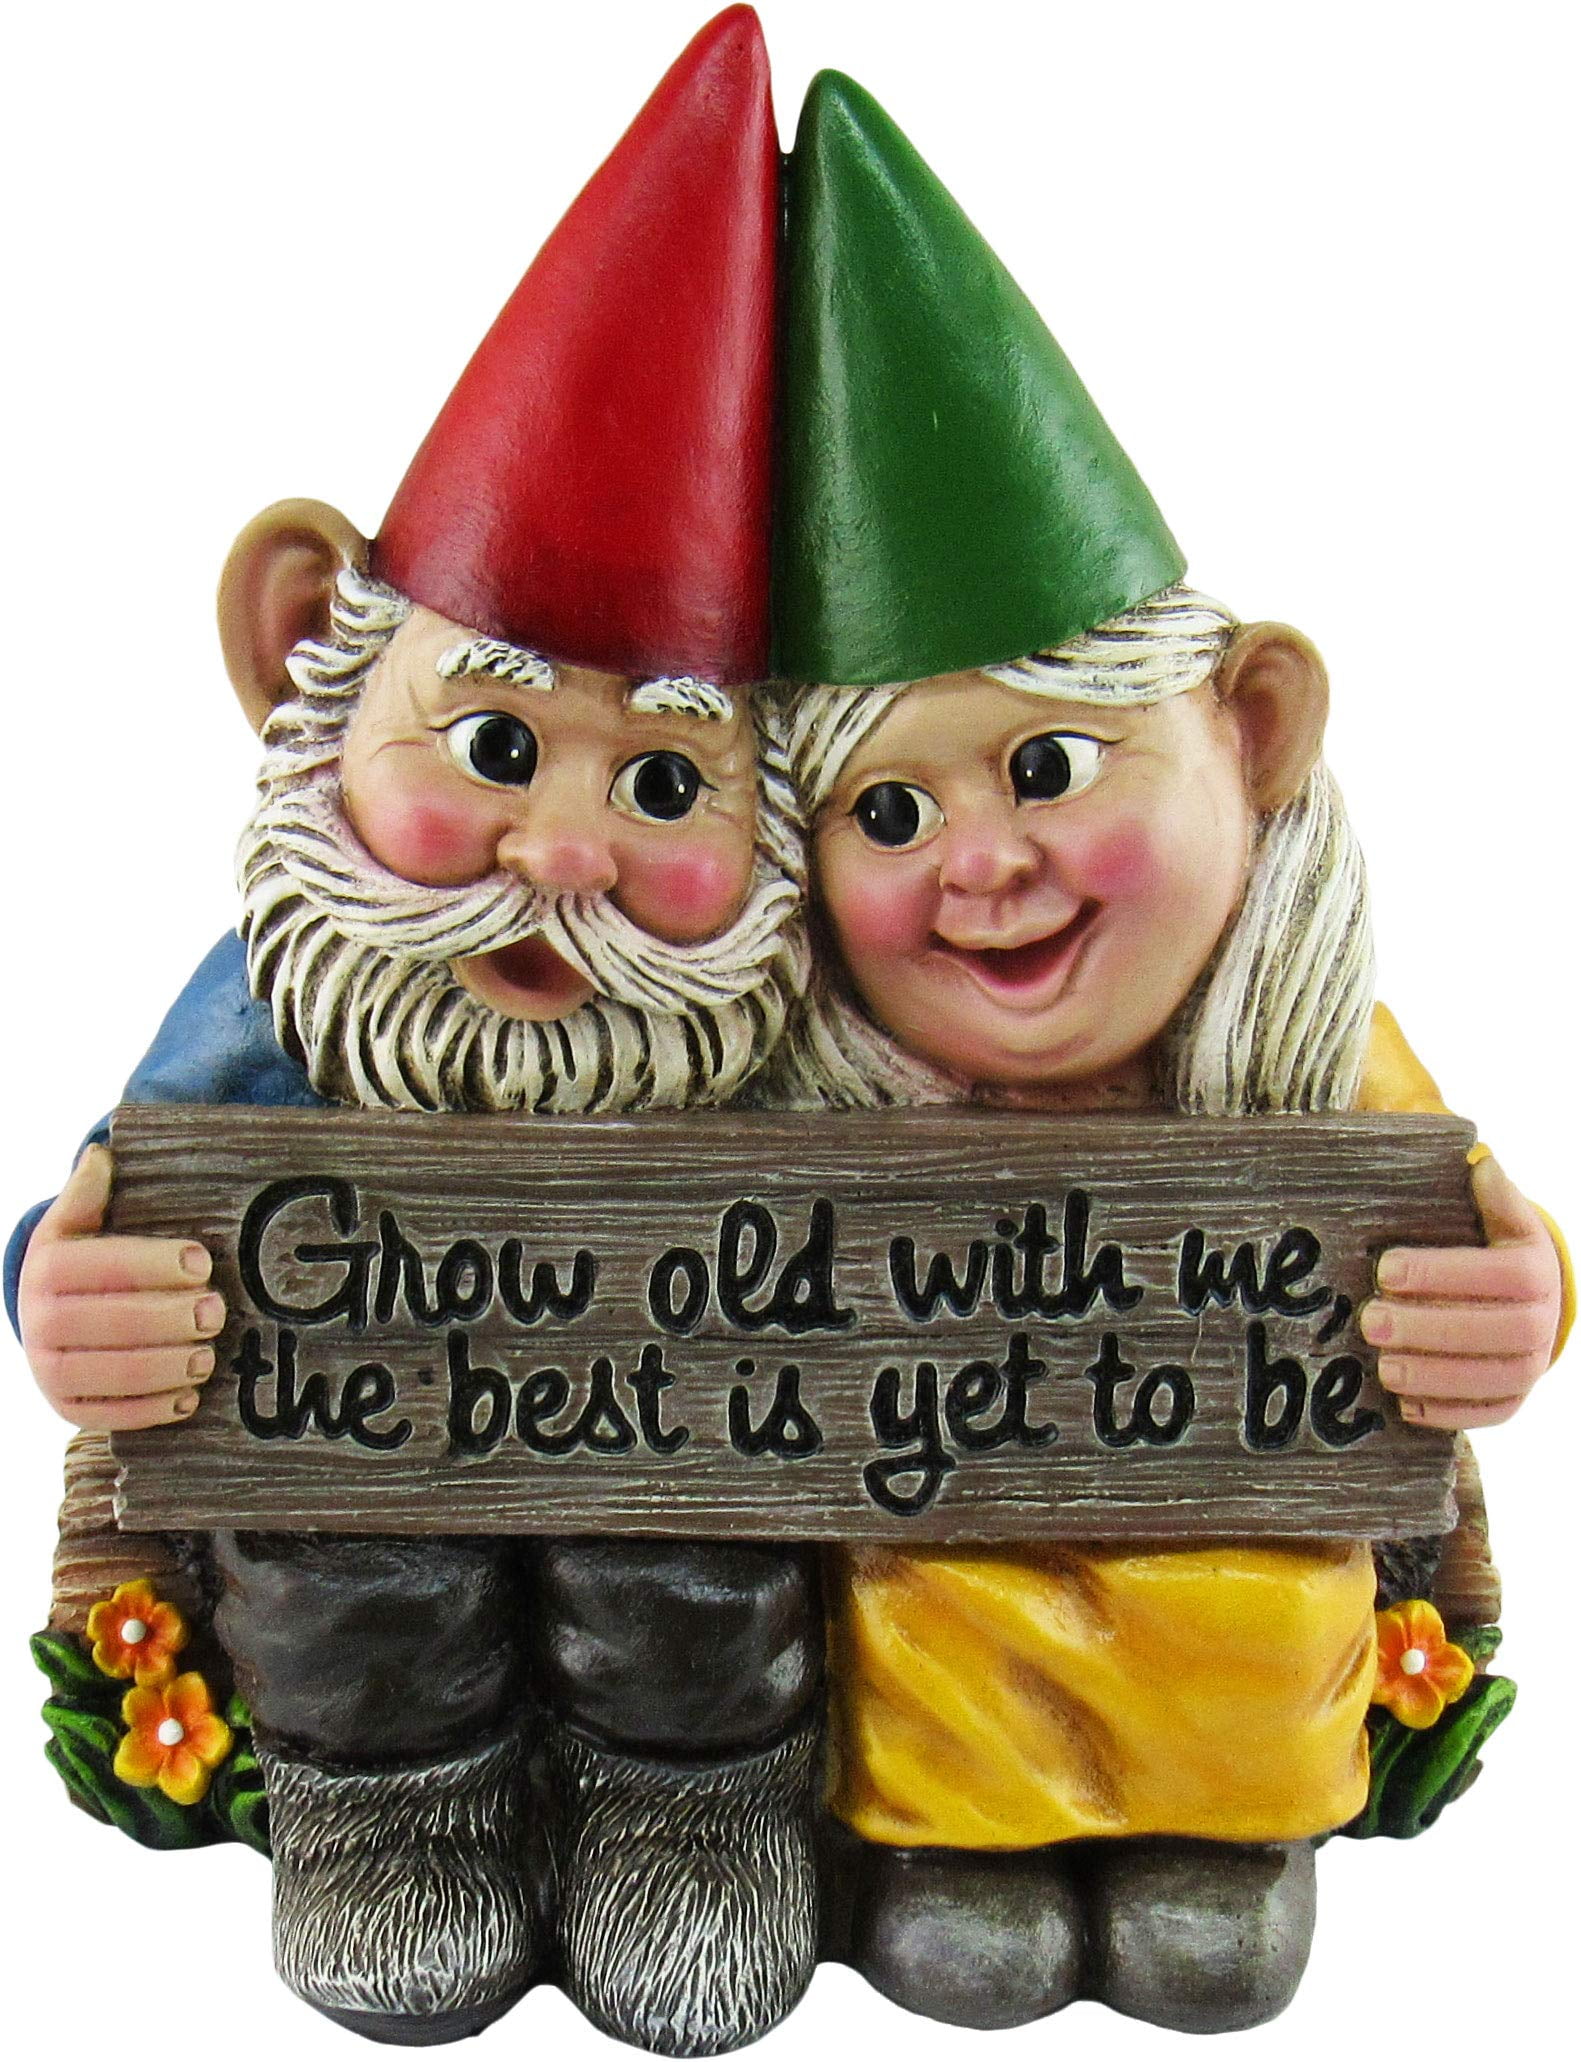 Collectibles Figurines & Knick Knacks Art & Collectibles gnome-gifts ...